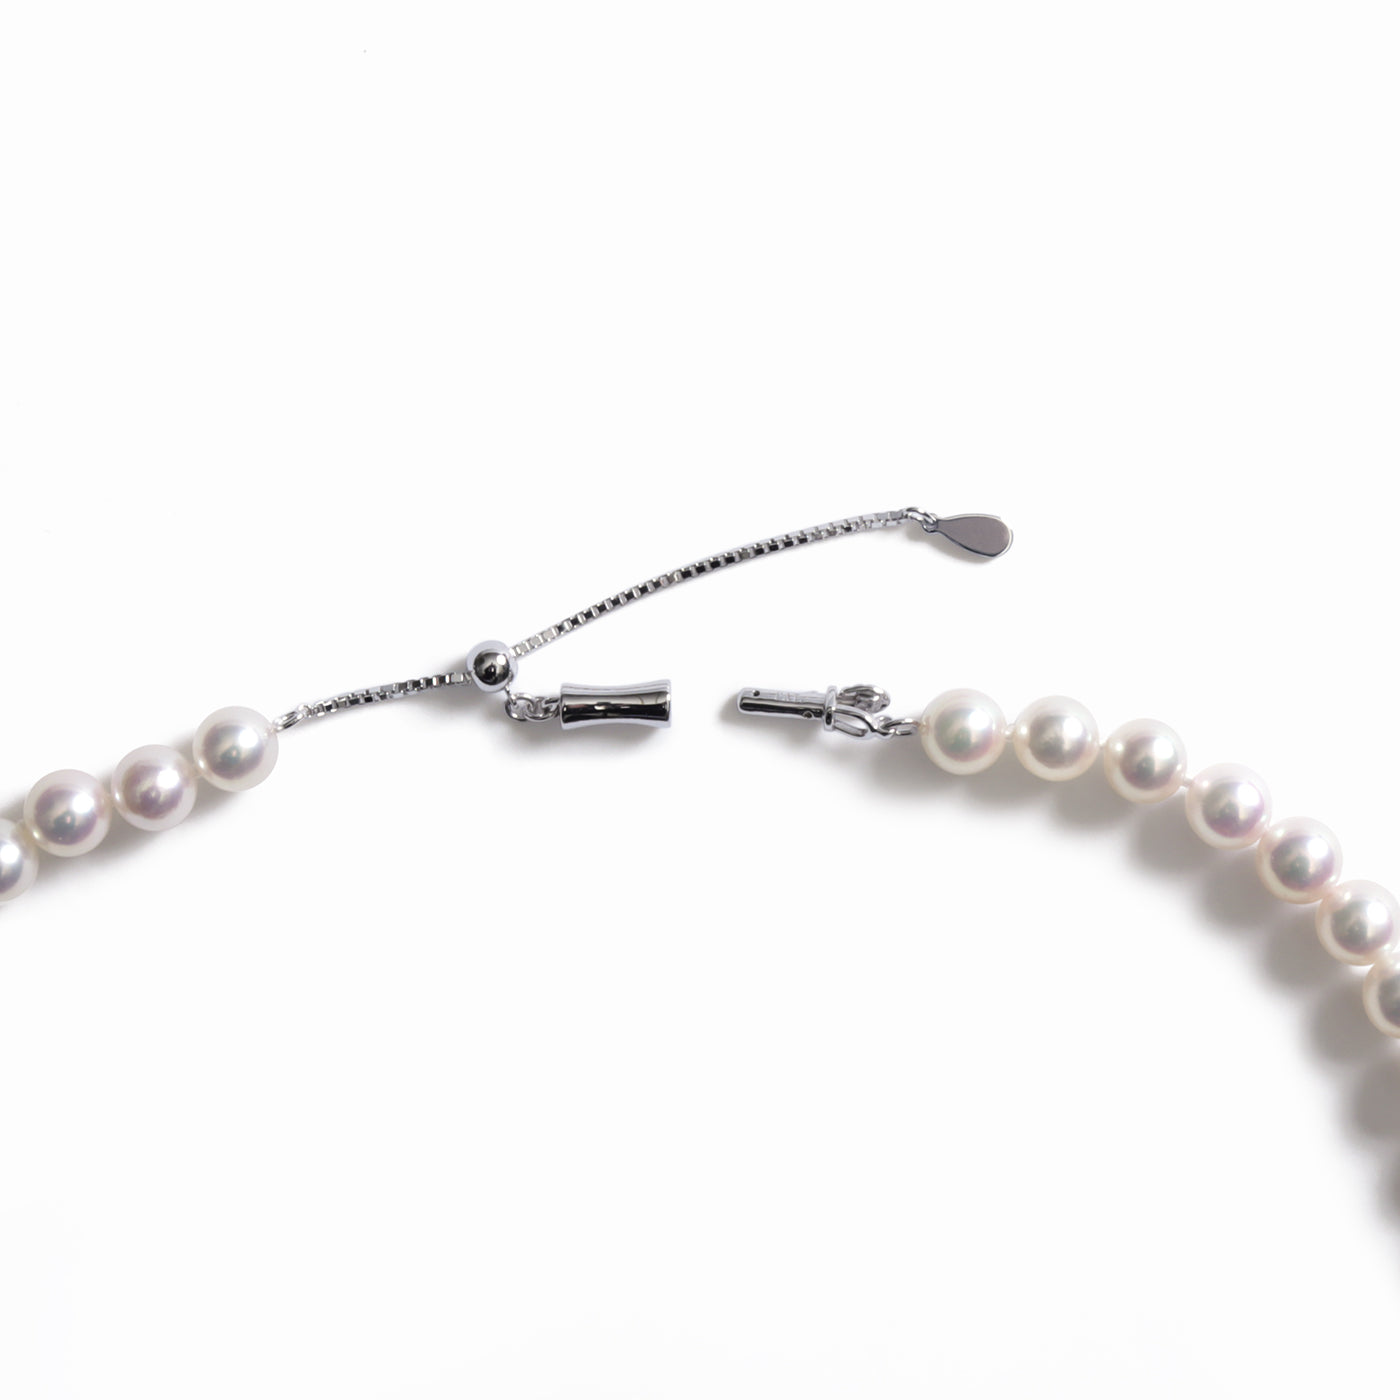 Akoya Pearl Necklace - 6.5-7.0mm ”花珠”アコヤパール